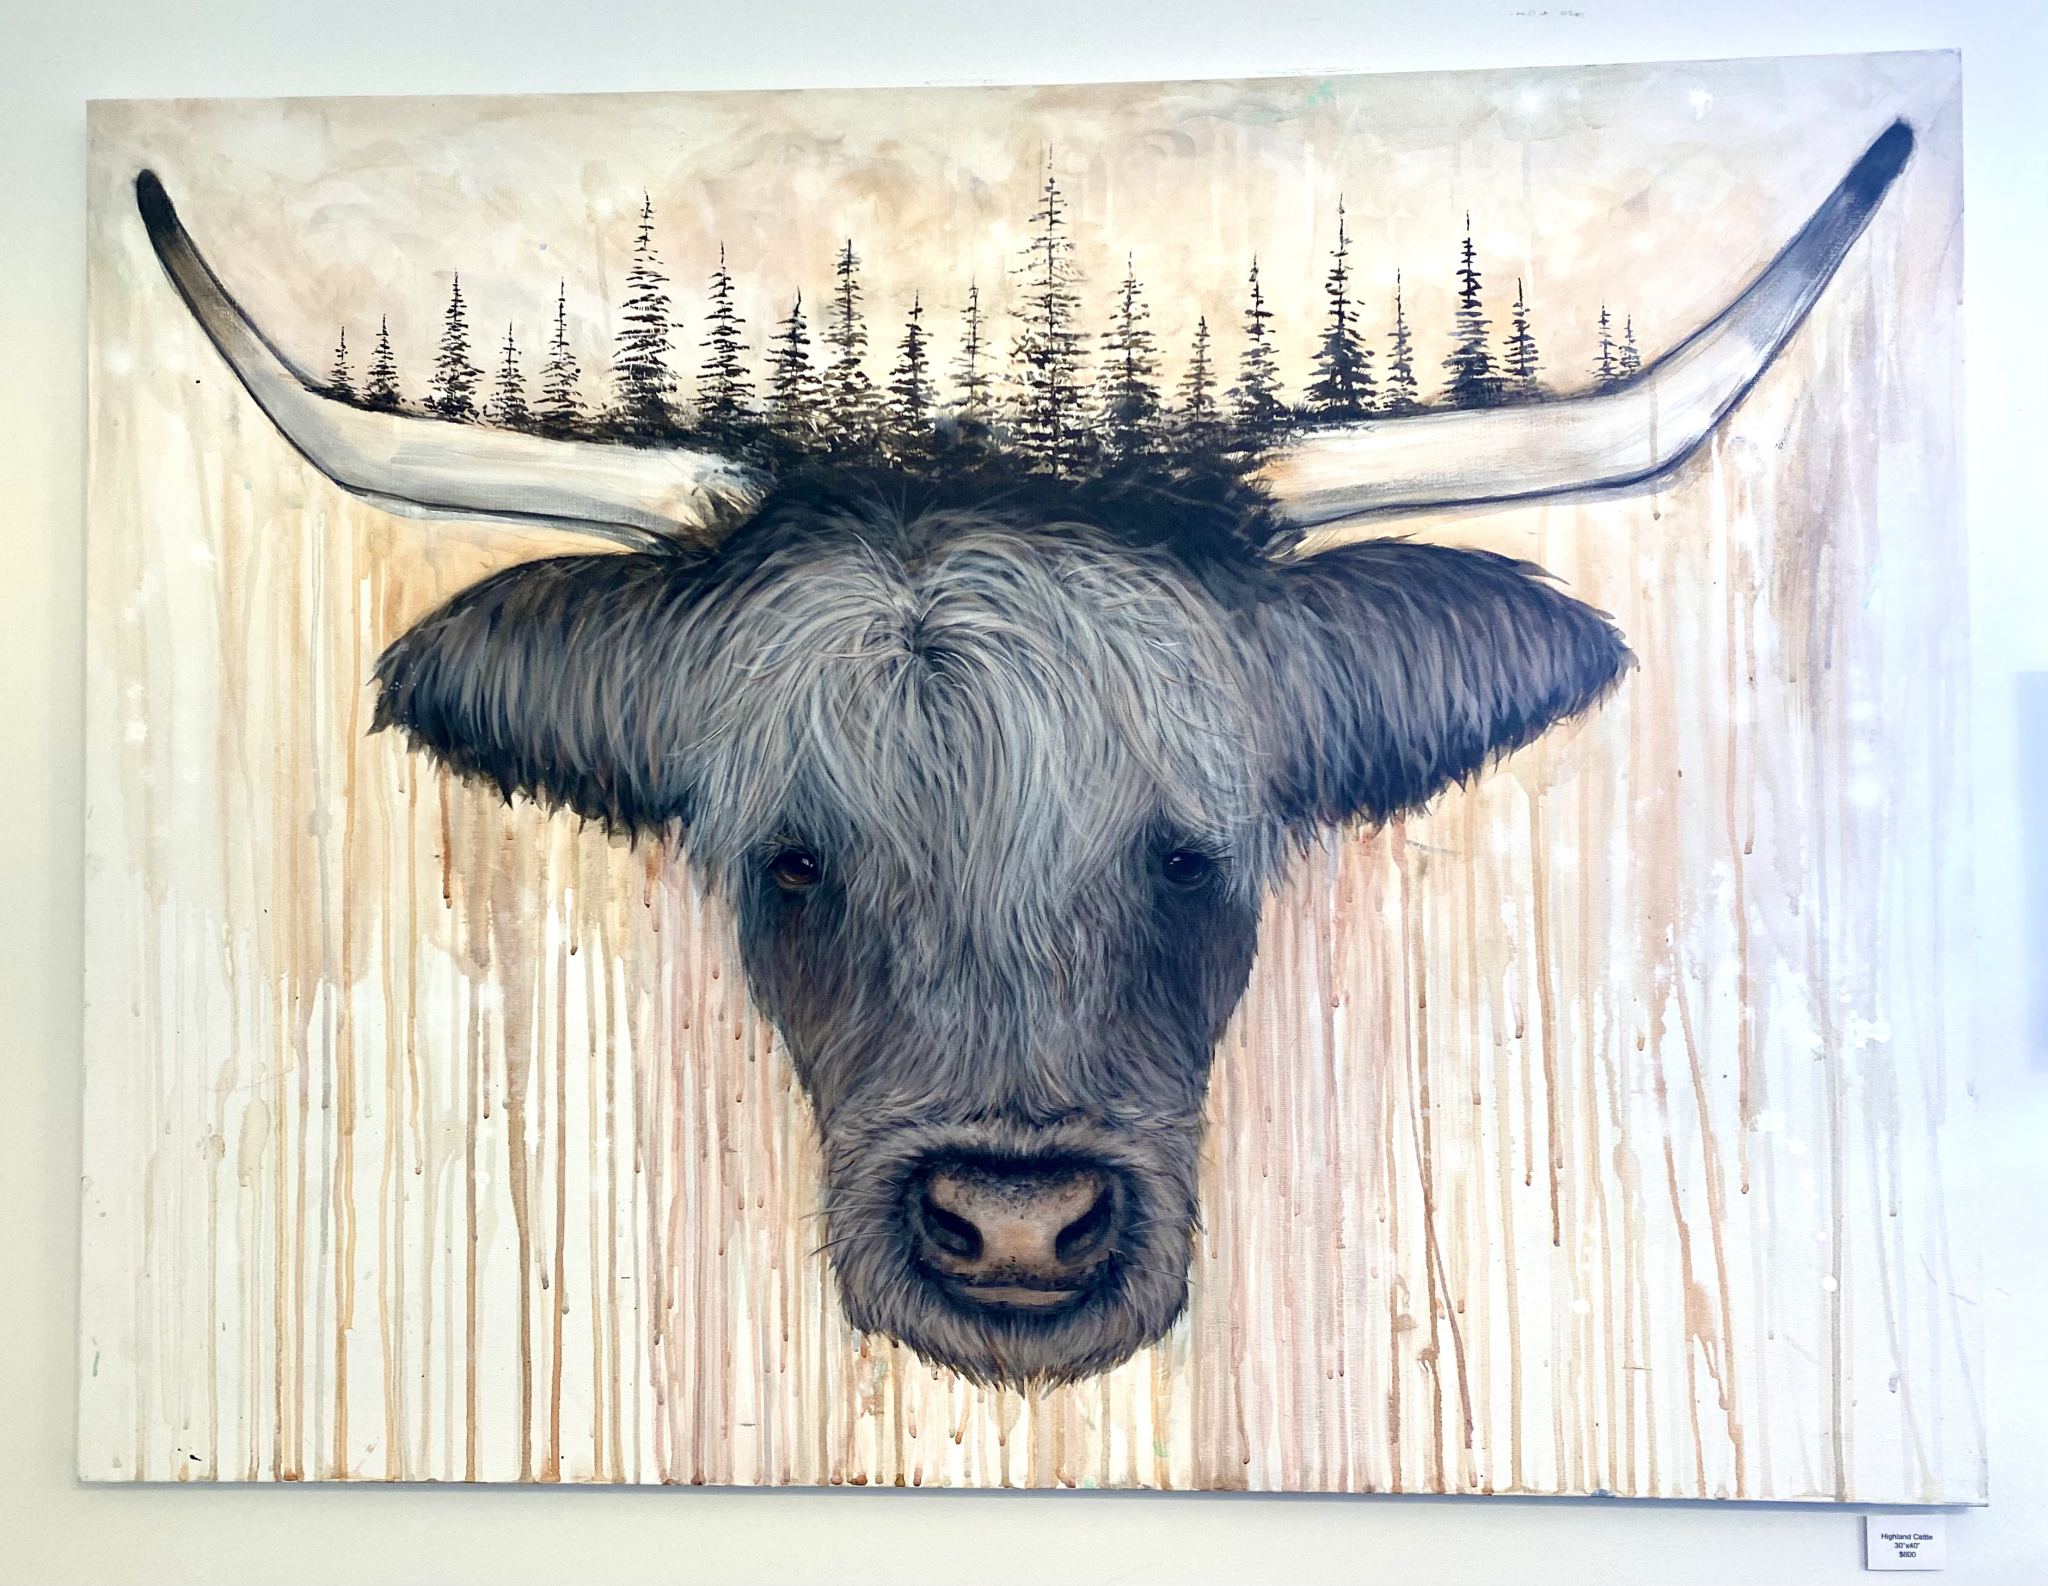 Abstract painting of a cow's head done by a NC artist with a disability